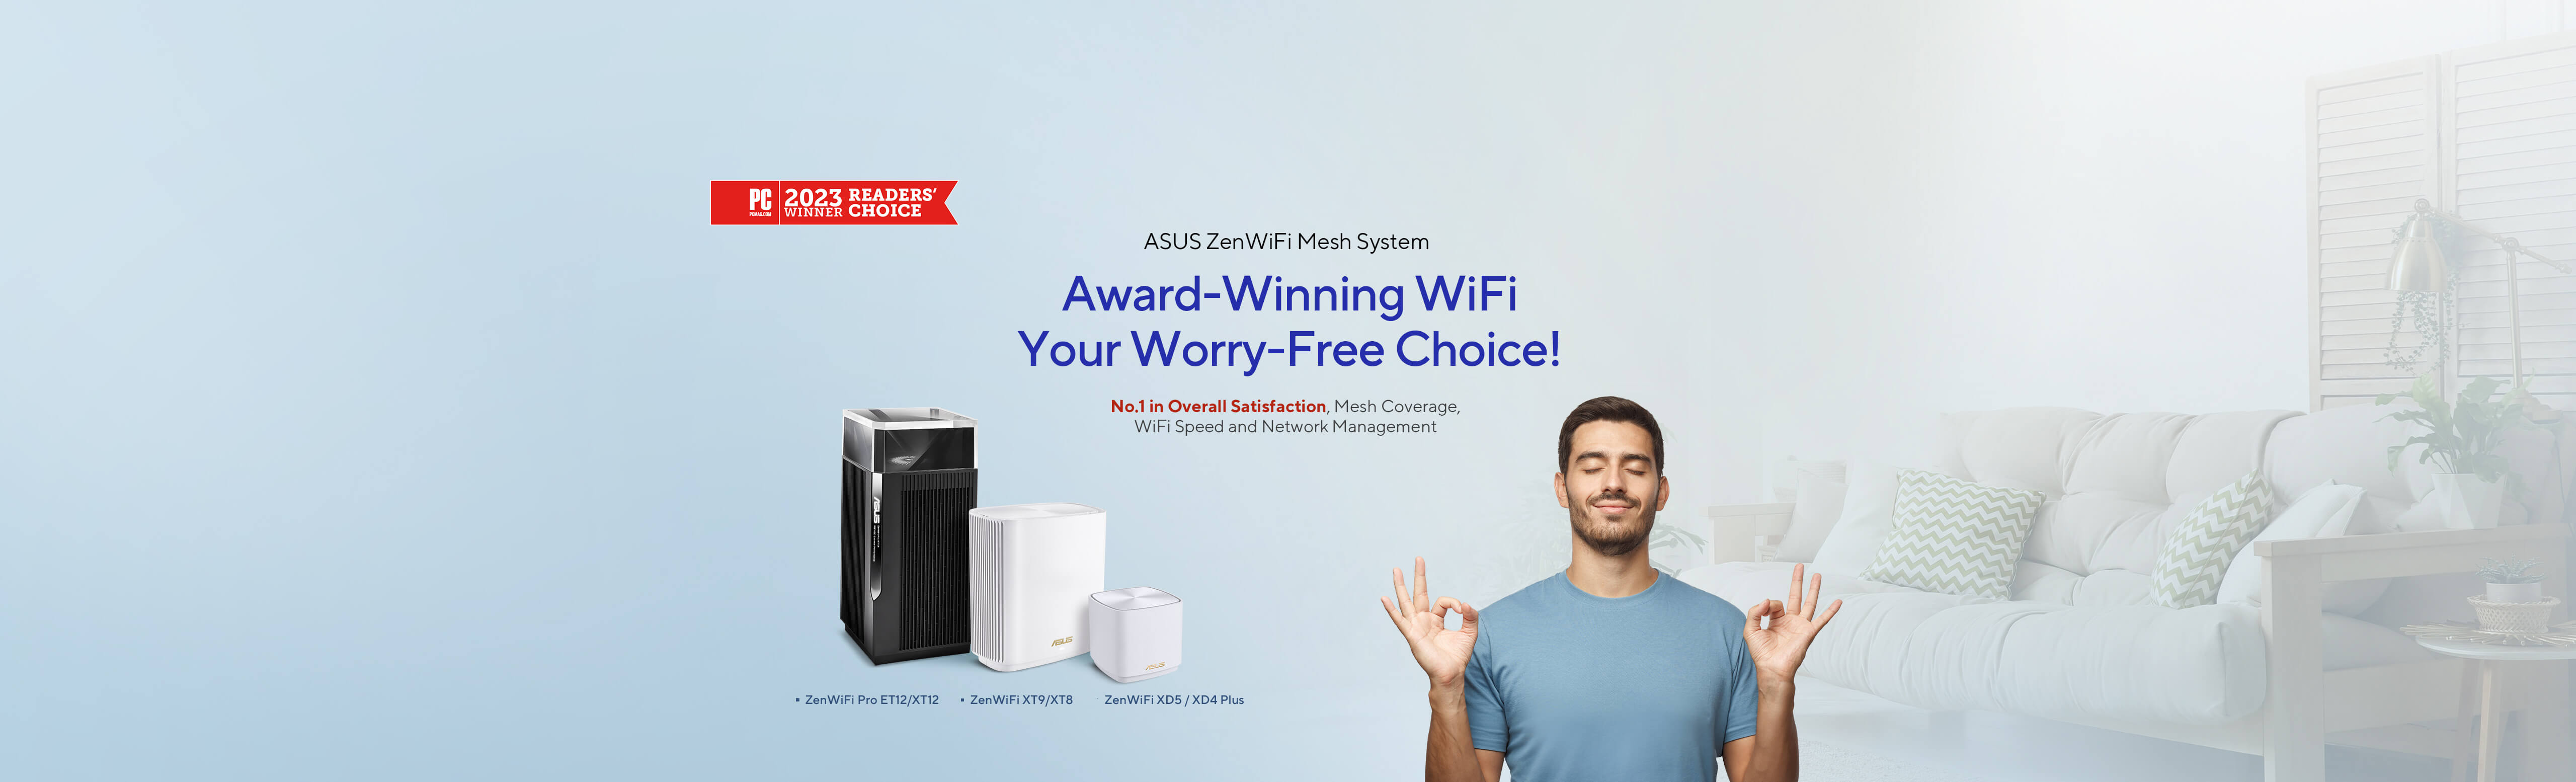 ZenWiFi featuring PCMag 2023 Reader's Choice award logo atop, a man with ok gesture in home setting showing peace of mind on the right. Products: ET12, XT12, XT9, XT8, XD5, XD4 Plus.